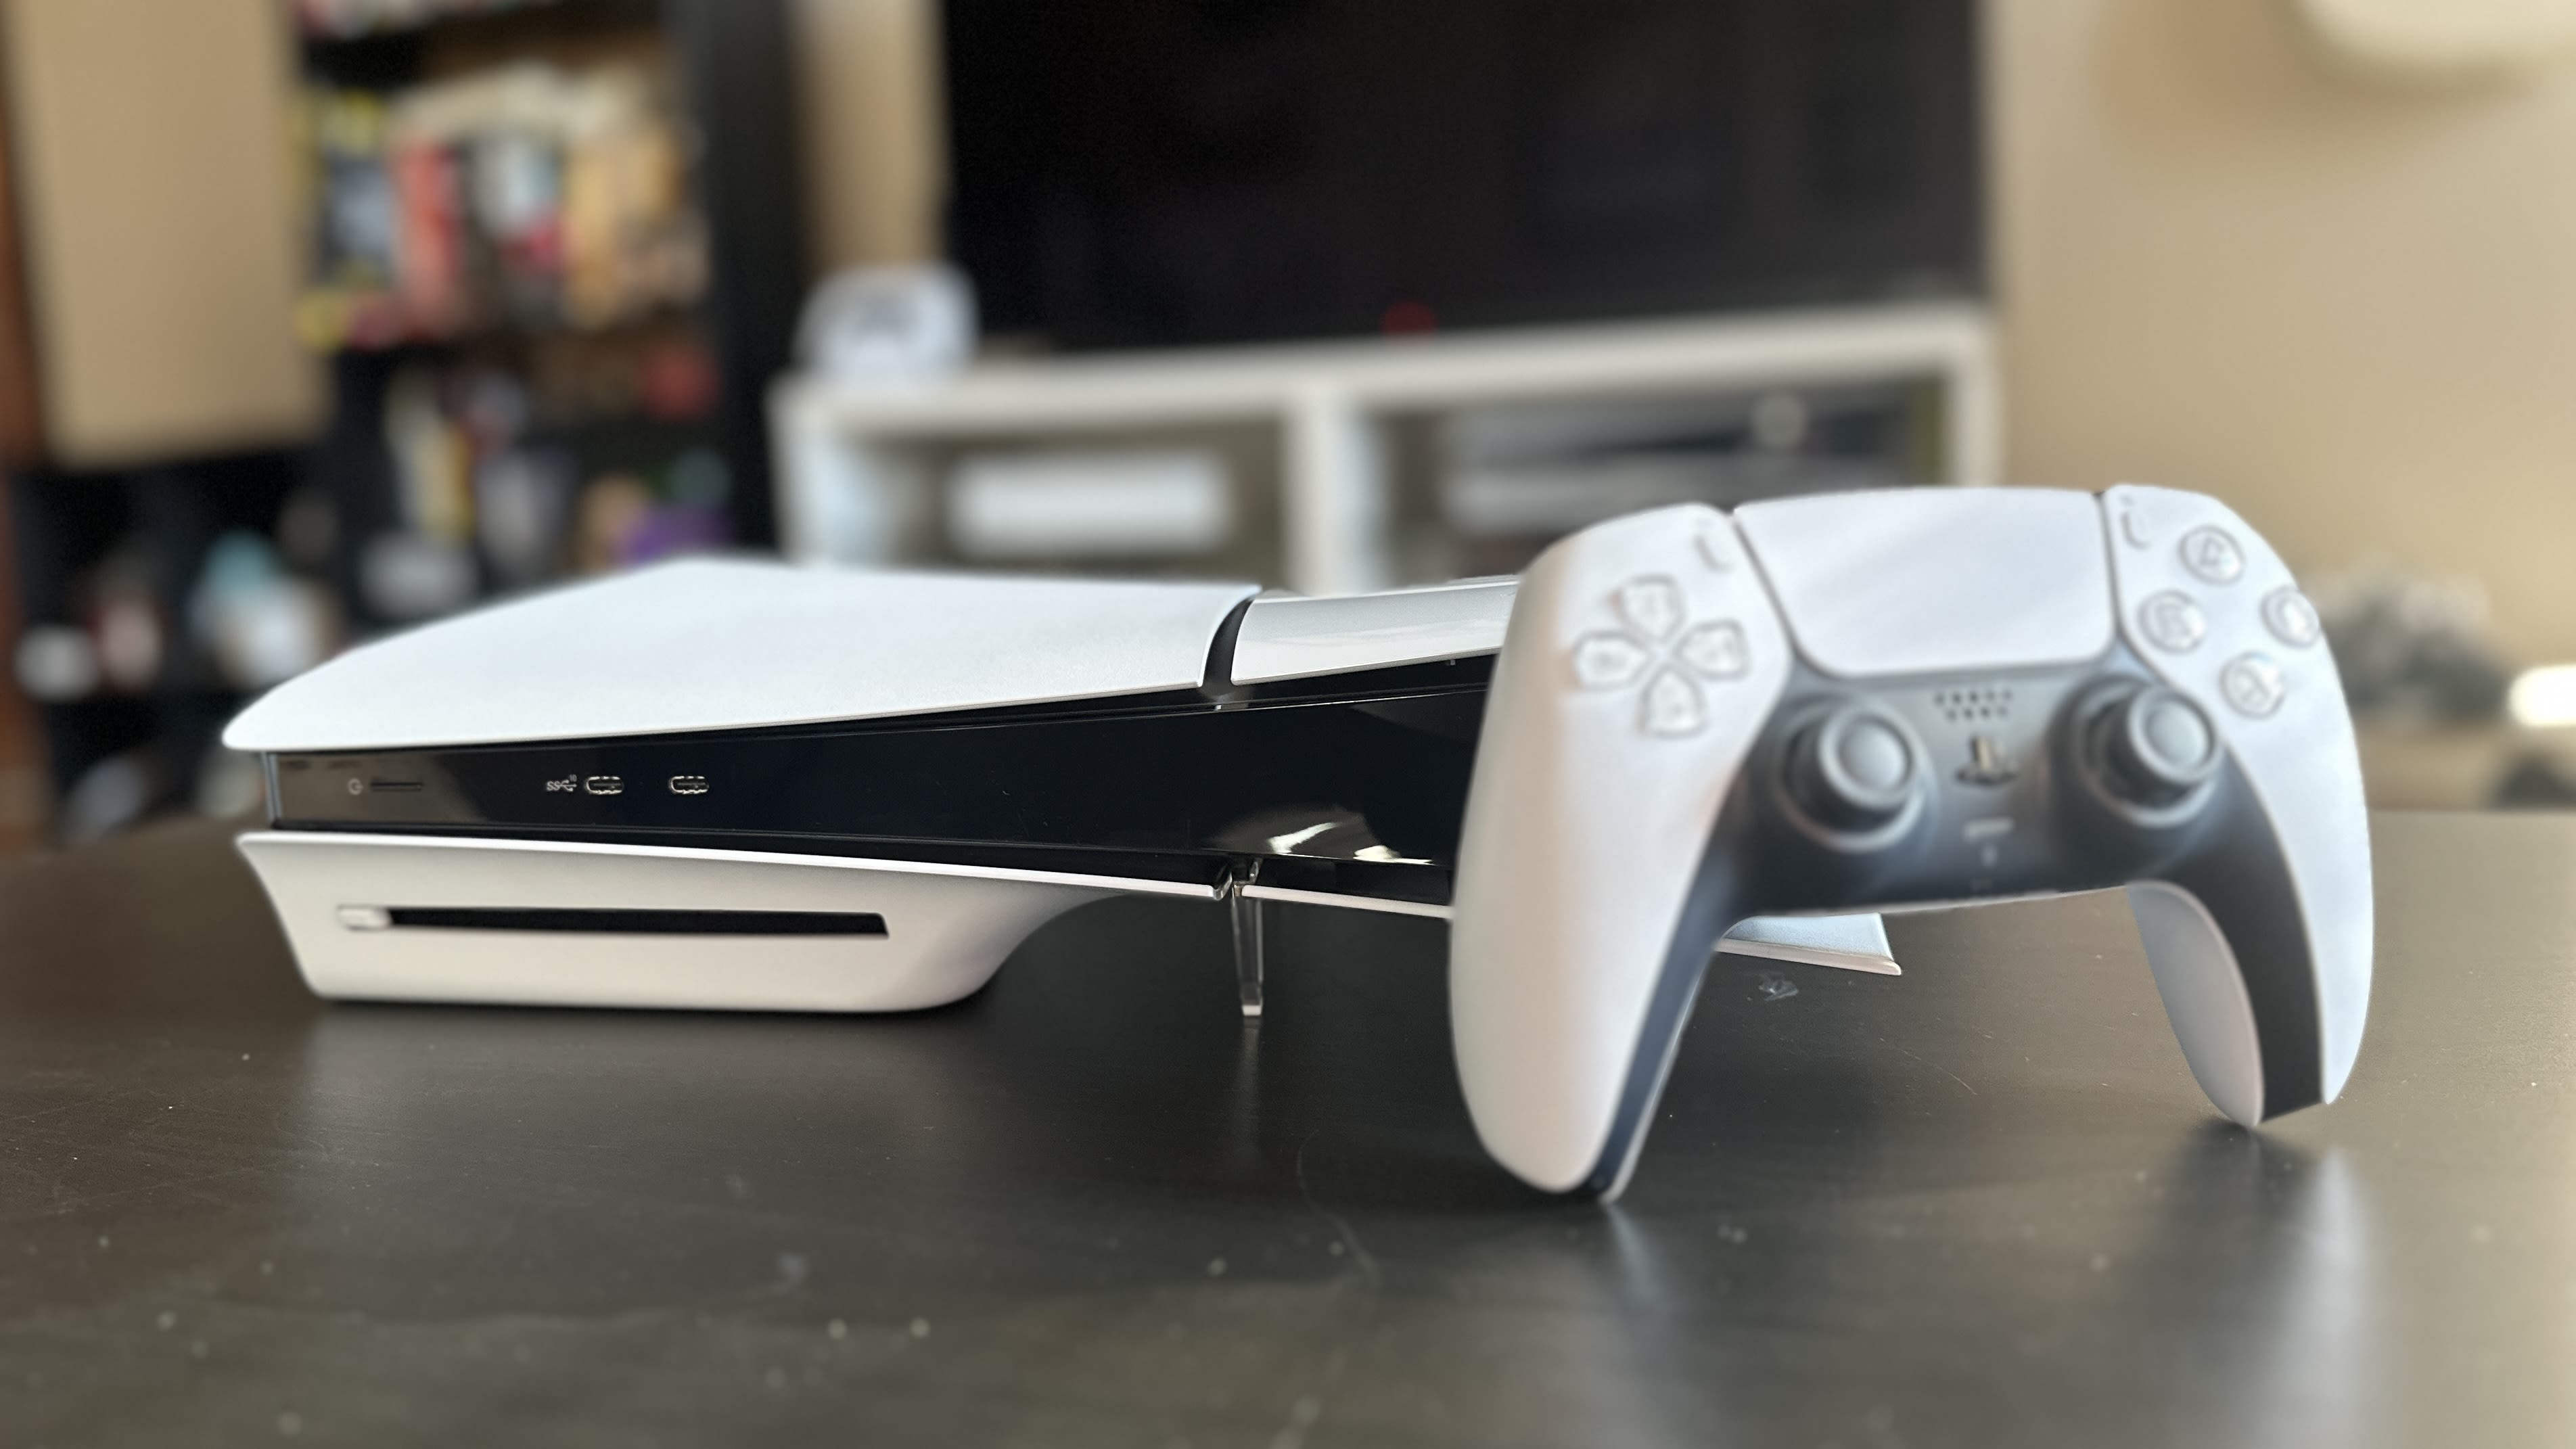 PS5 Slim review: The console we should have gotten from the start